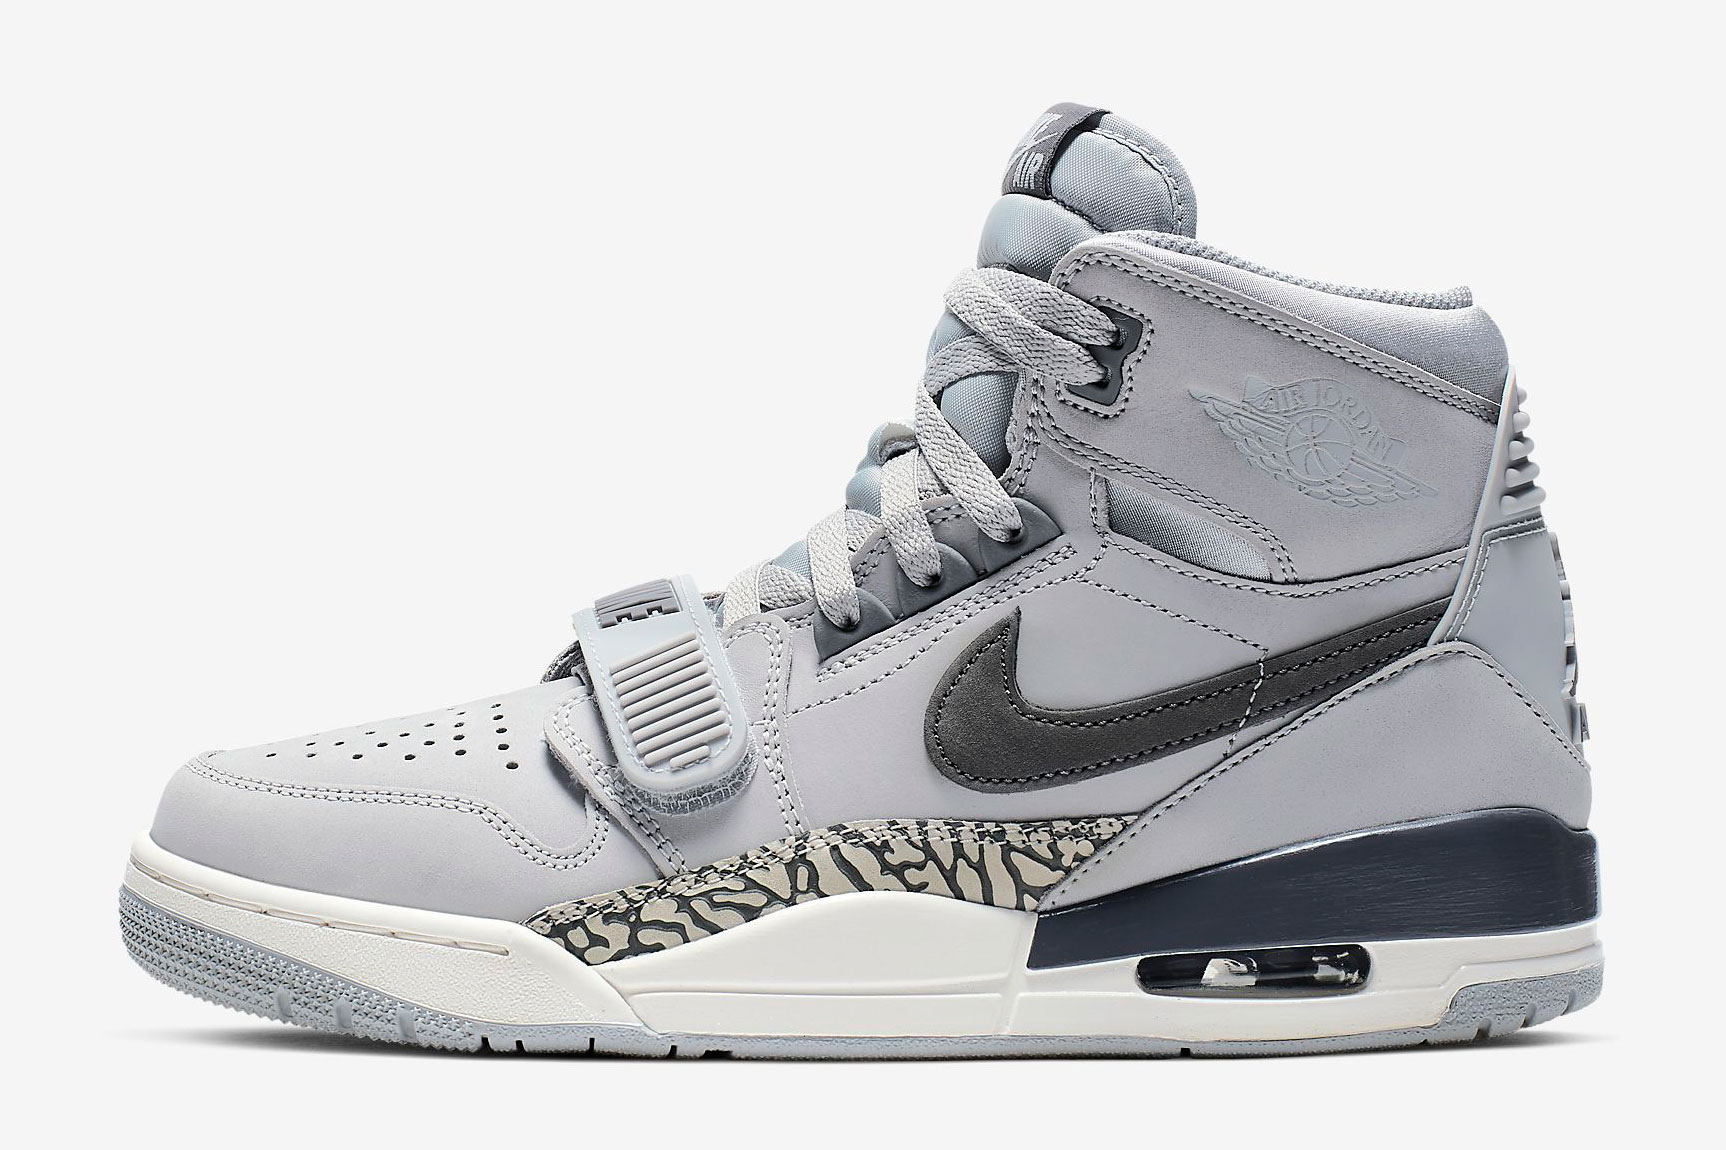 jordan-legacy-312-wold-grey-release-date-where-to-buy